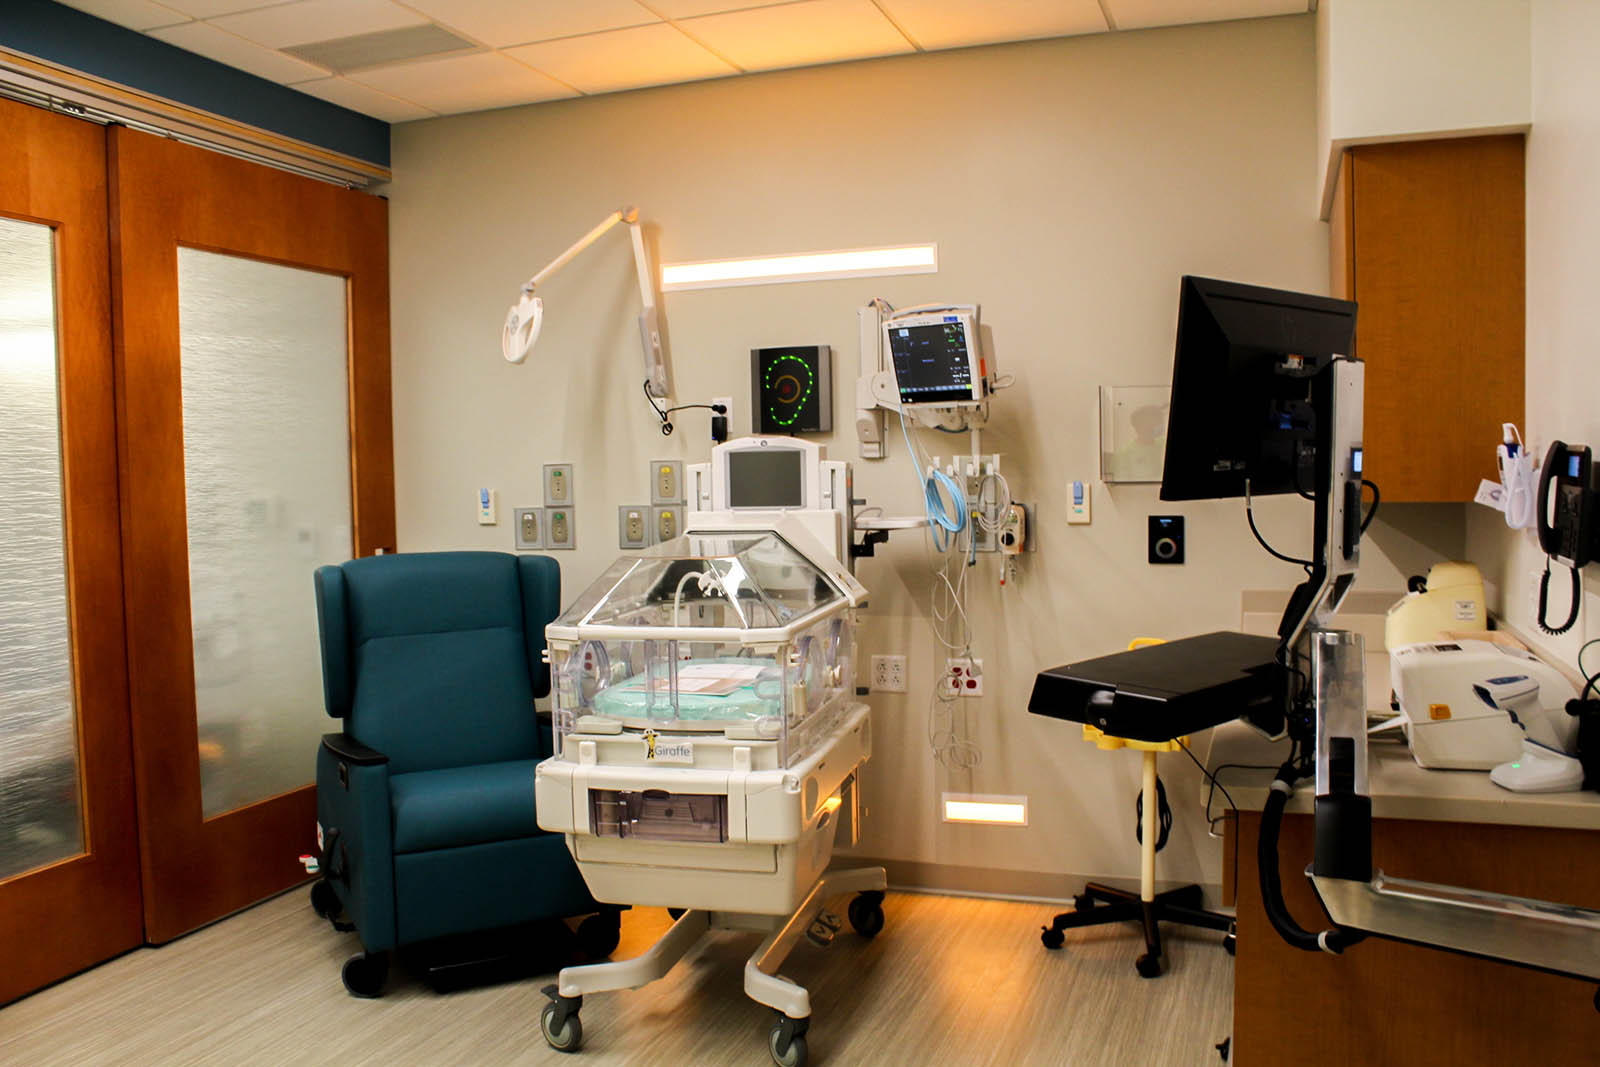 Infant care room in the Neonatal Intensive Care Unit at Bellin Hospital in Green Bay, WI